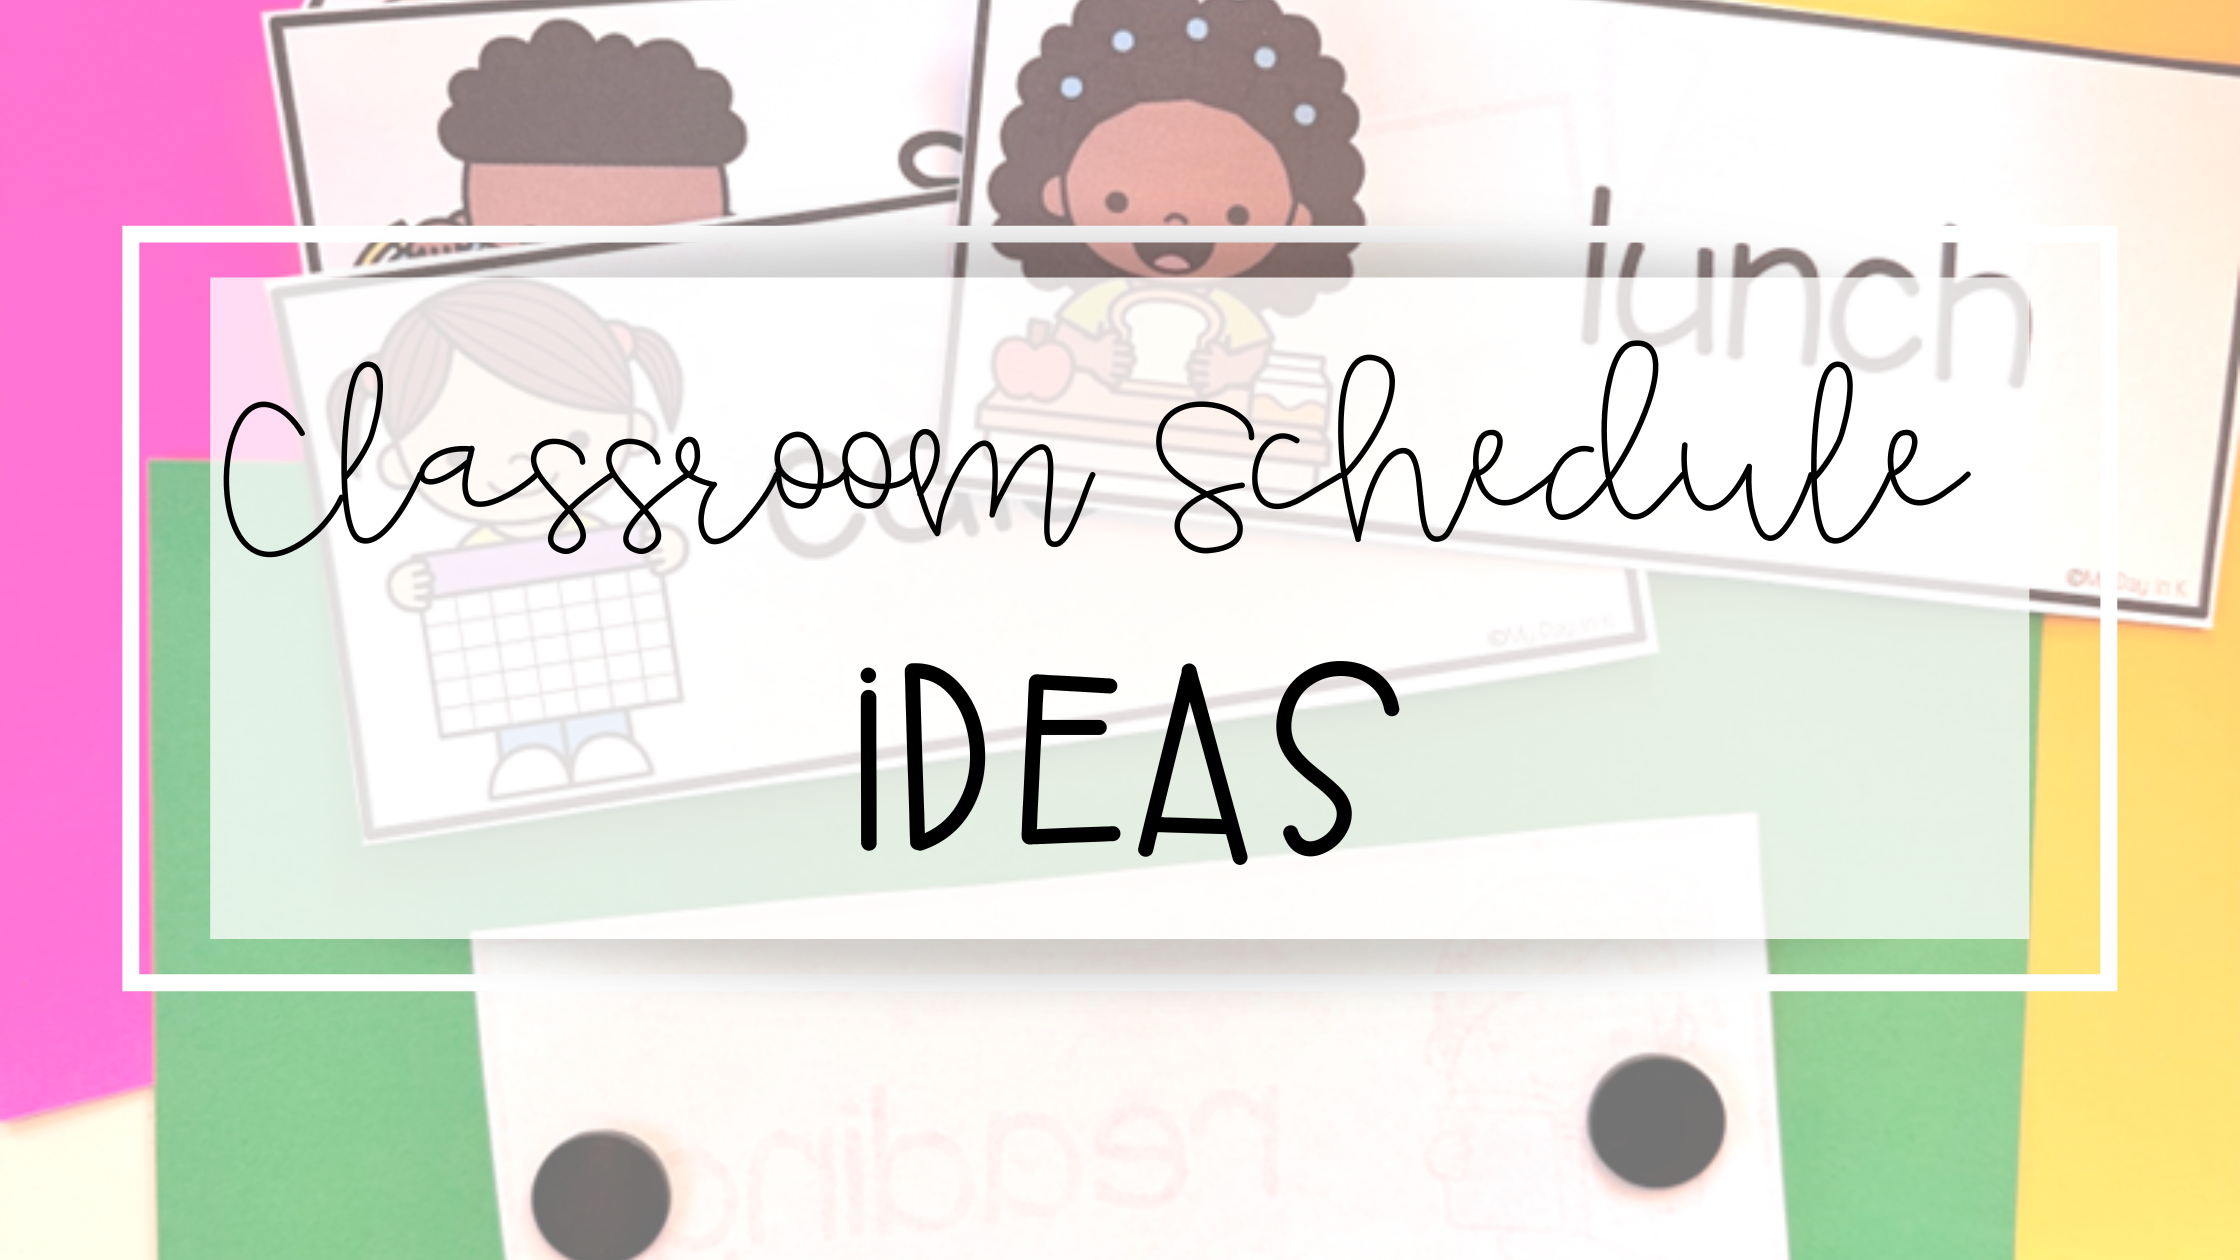  Innovative Classroom Schedule Ideas for Primary Grades